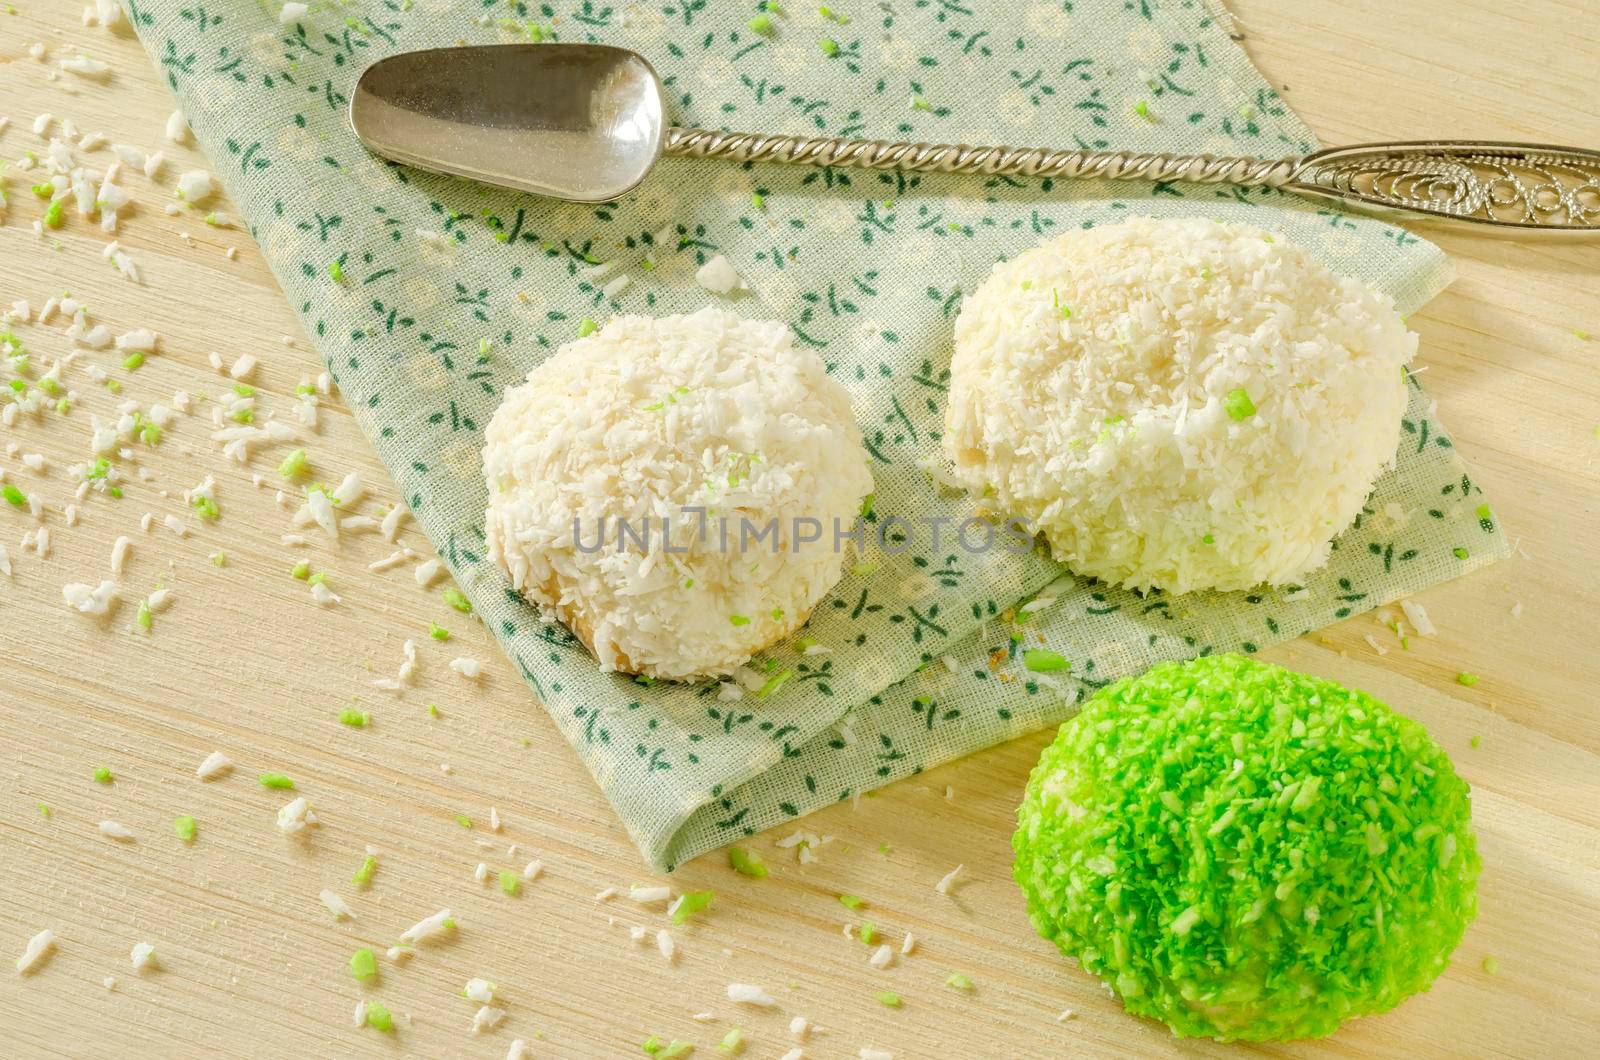 Tree cookies with coconut flakes on cotton cloth. Near spoons. Overhead view